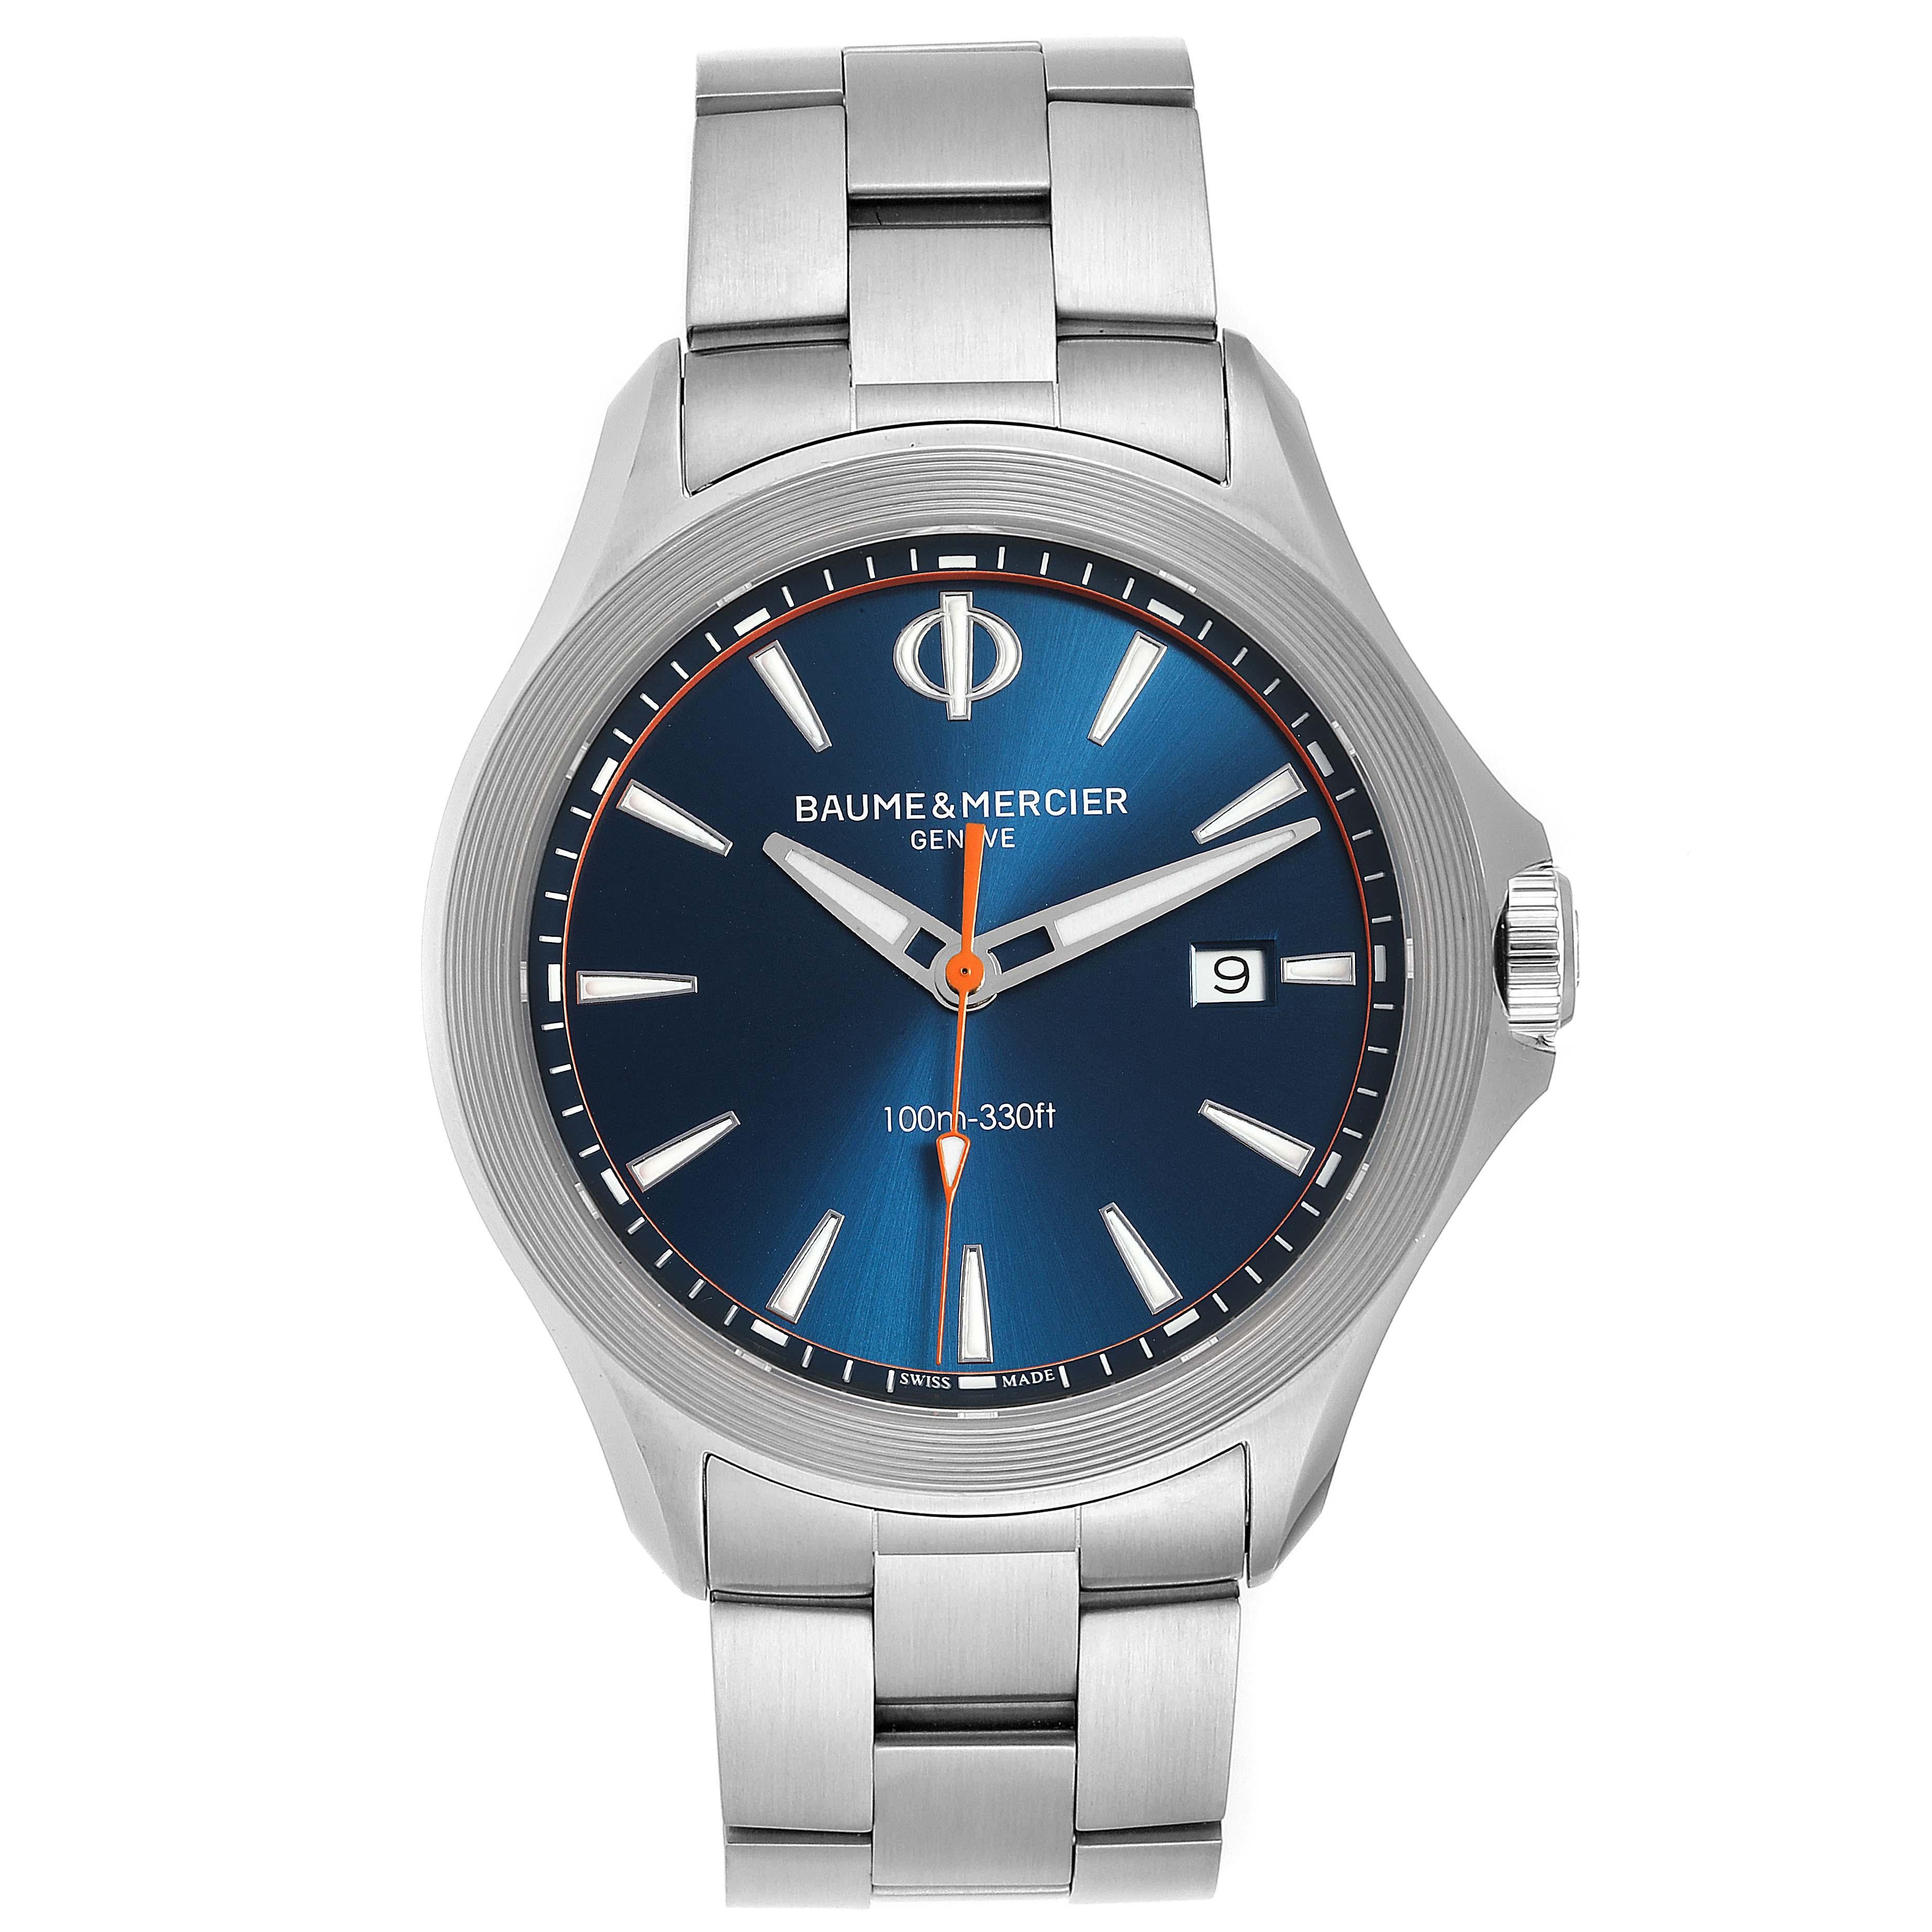 Baume Mercier Clifton Blue Dial Steel Mens Watch M0A10413 Box Card. Quartz movement. Stainless steel case 42.0 mm in diameter. . Scratch resistant sapphire crystal. Blue dial with luminous hour markers and hands. Stainless steel bracelet with fold